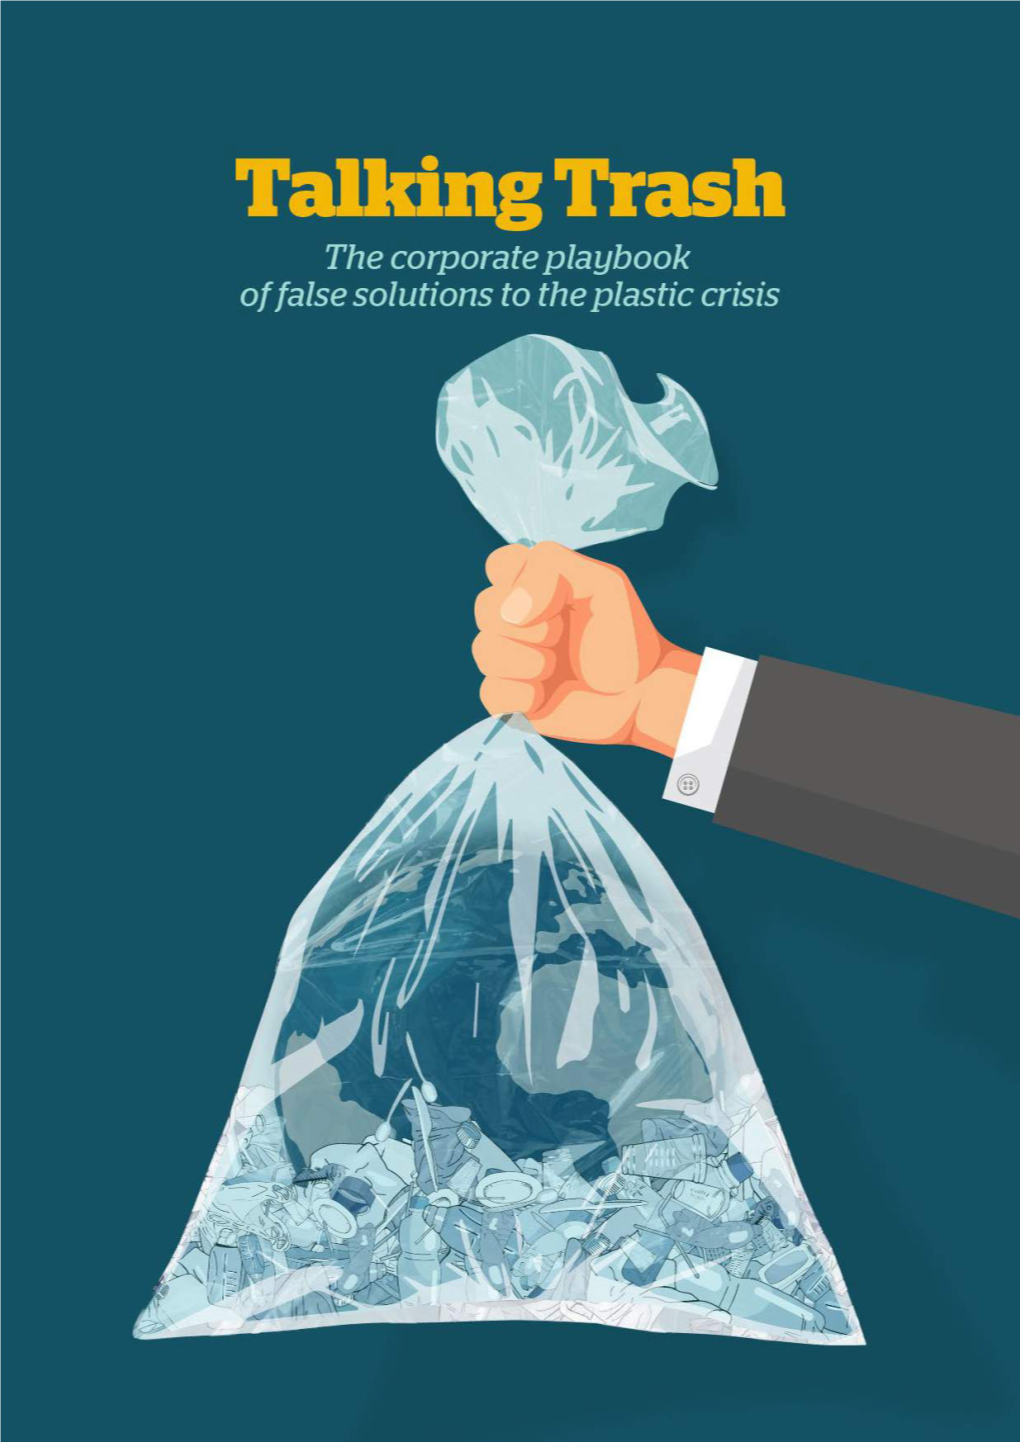 Talking Trash: the Corporate Playbook of False Solutions to the Plastic Crisis